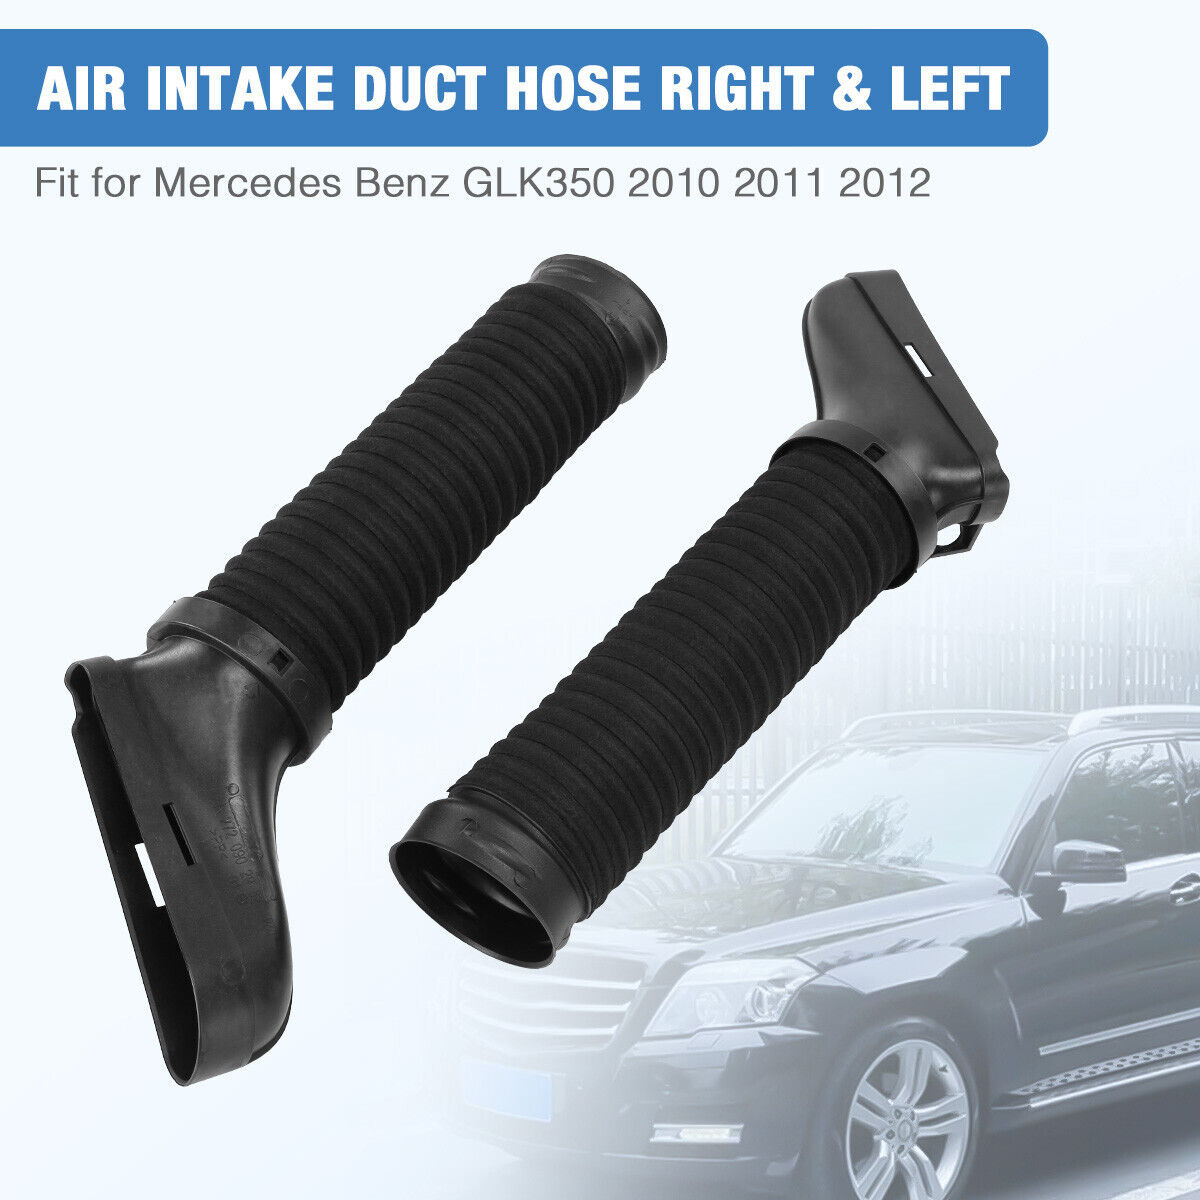 Pair Air Intake Inlet Duct Hose Right & Left For Mercedes Benz GLK350 2010-2012